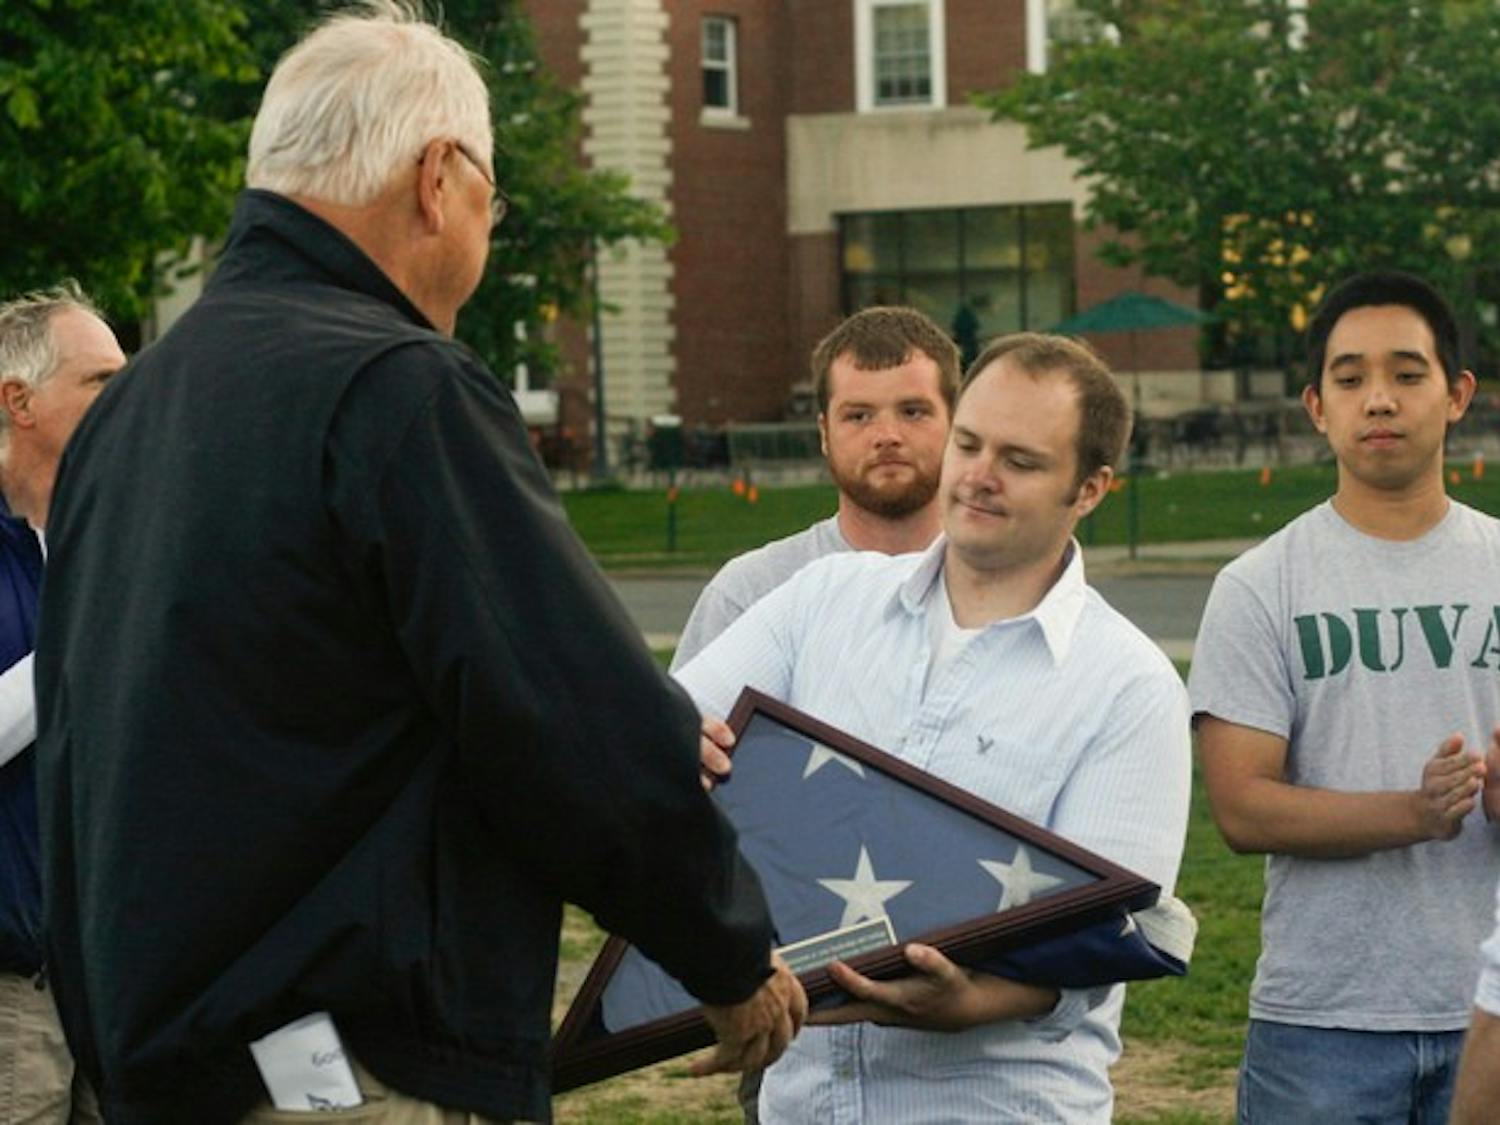 College President James Wright was presented with an American flag at the conclusion of a Memorial Day ceremony on Monday.